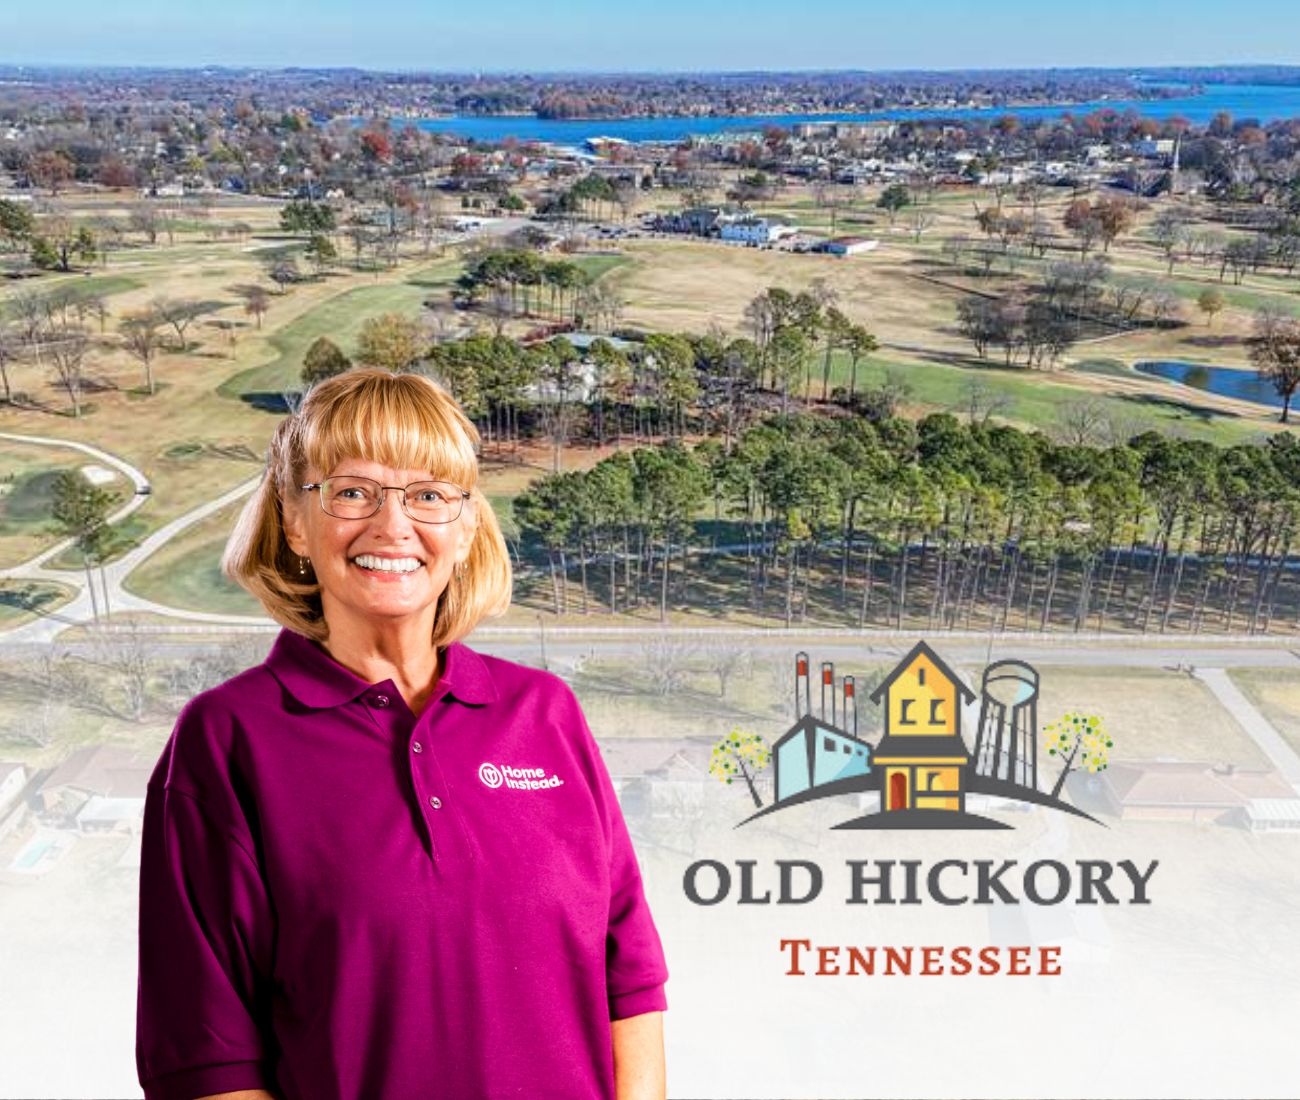 Home Instead caregiver with Old Hickory Tennessee in the background